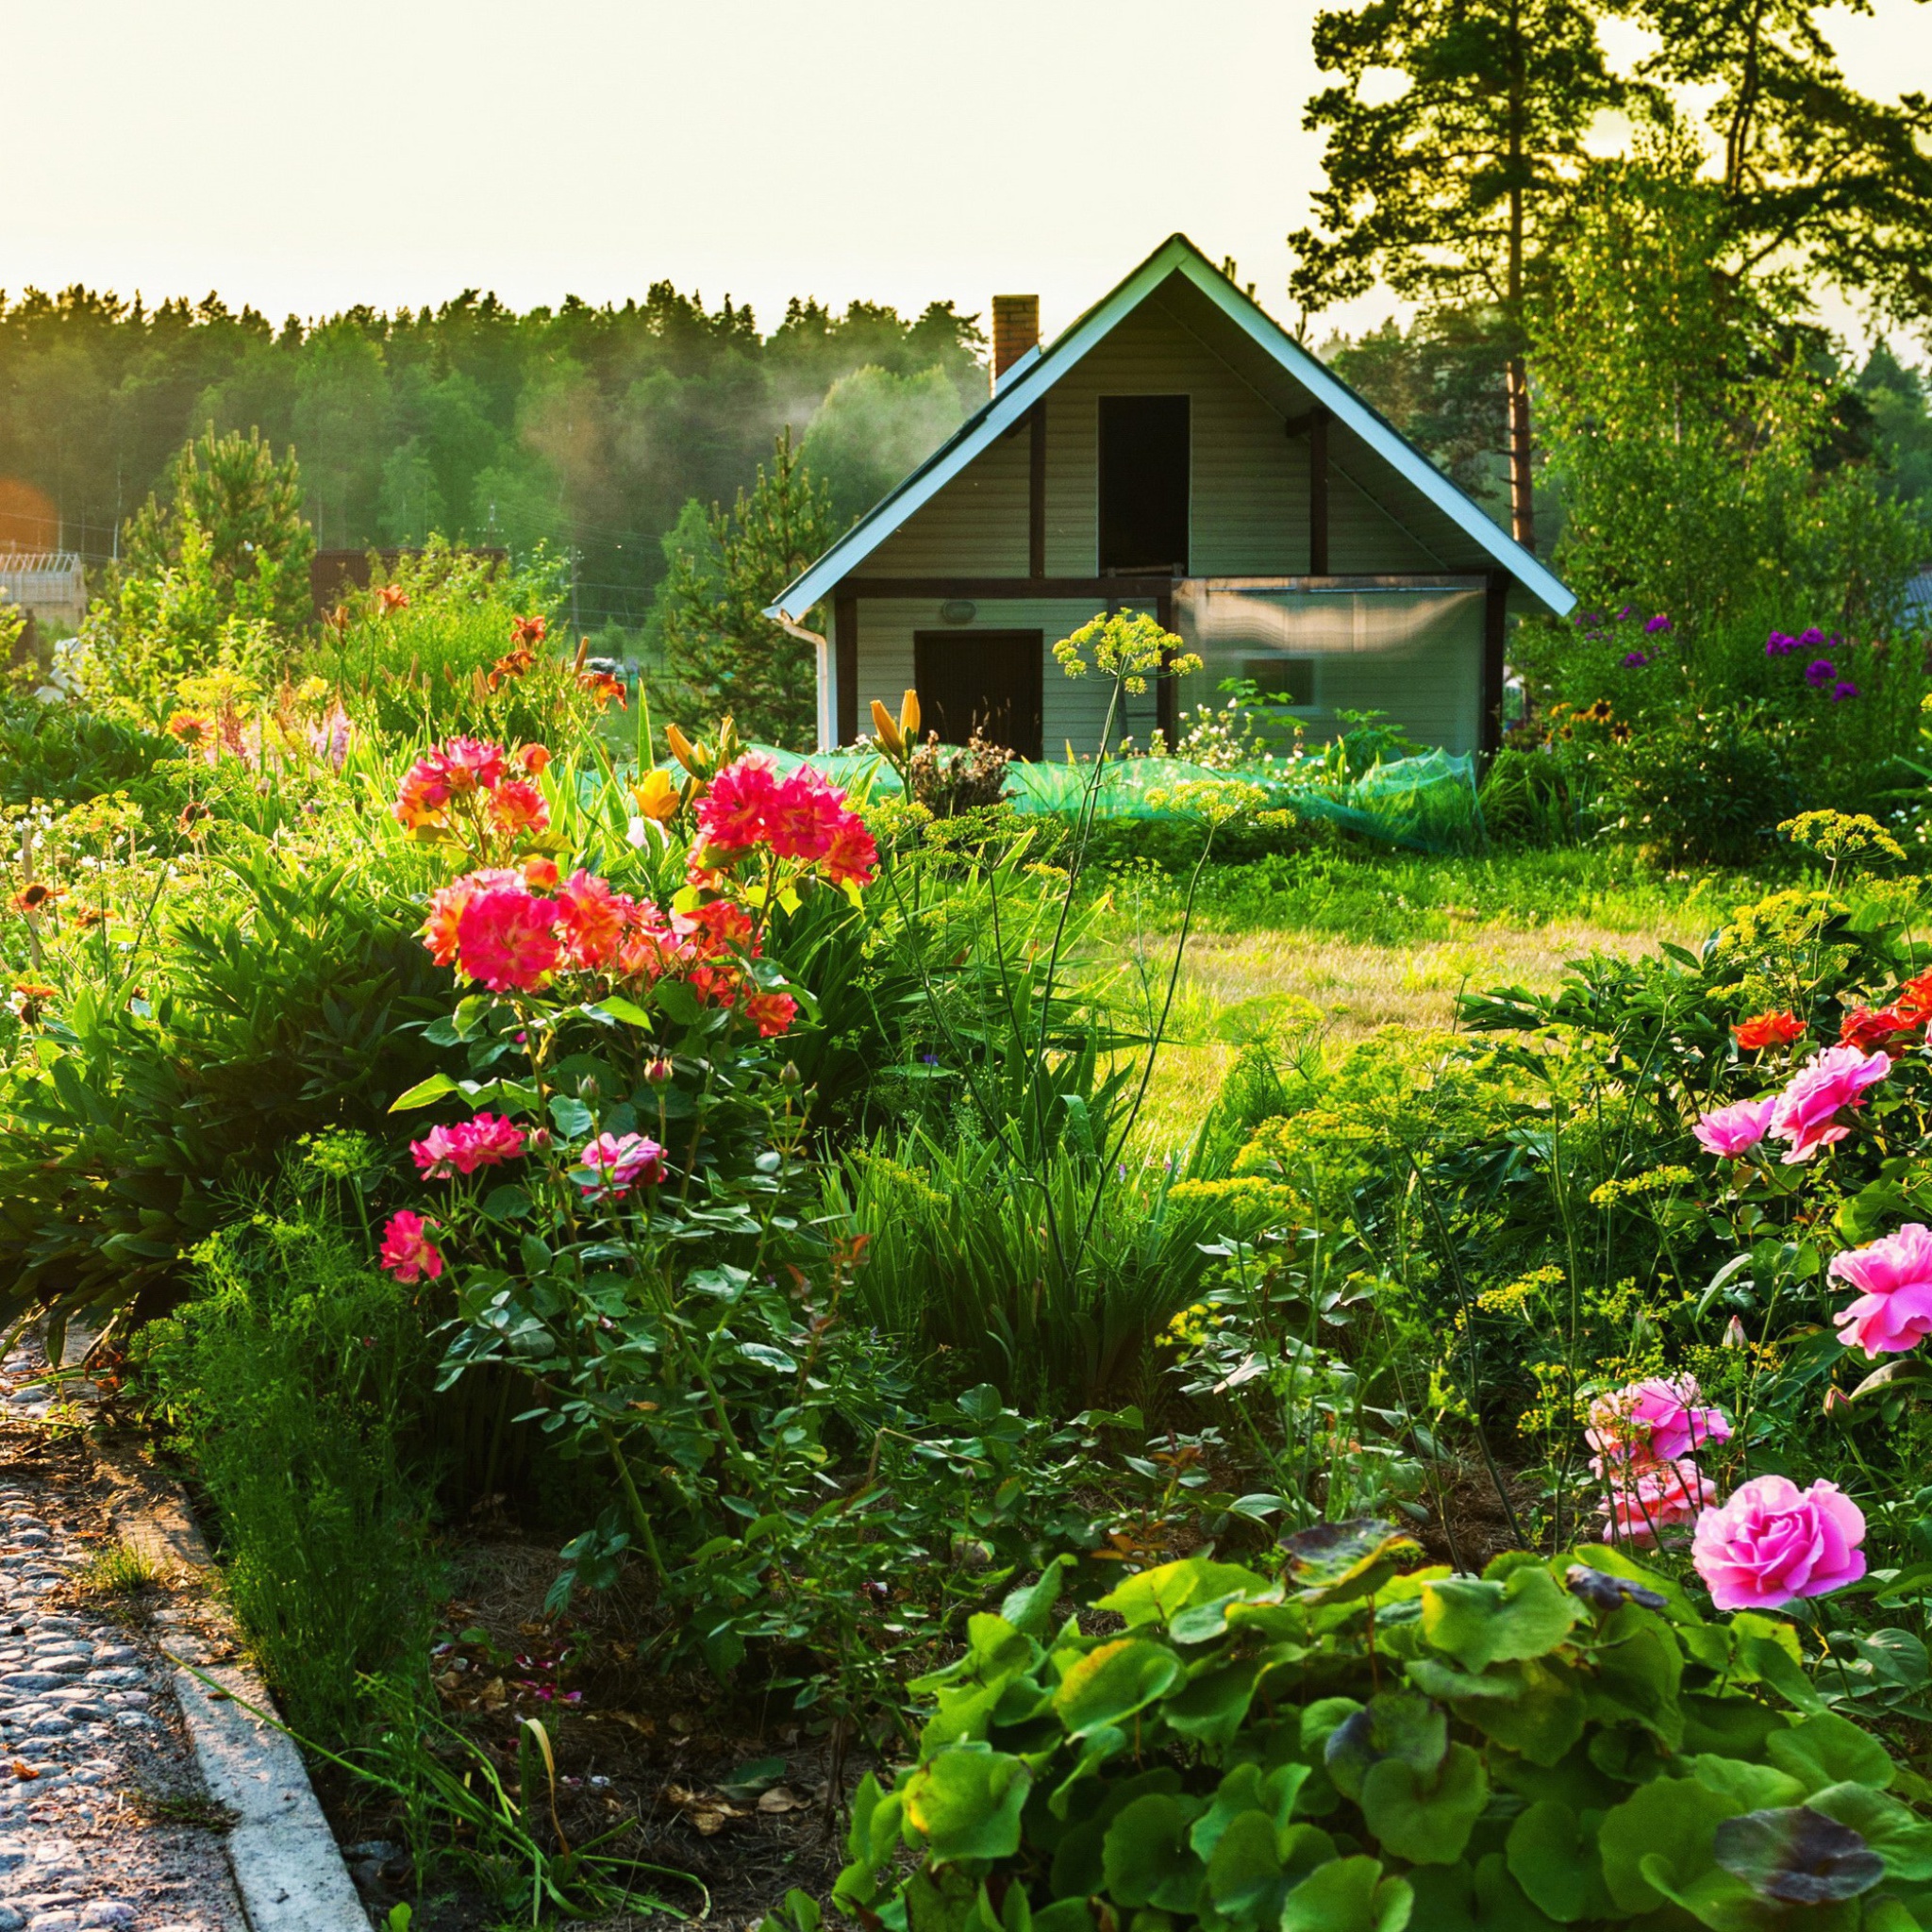 Country house with flowers screenshot #1 2048x2048